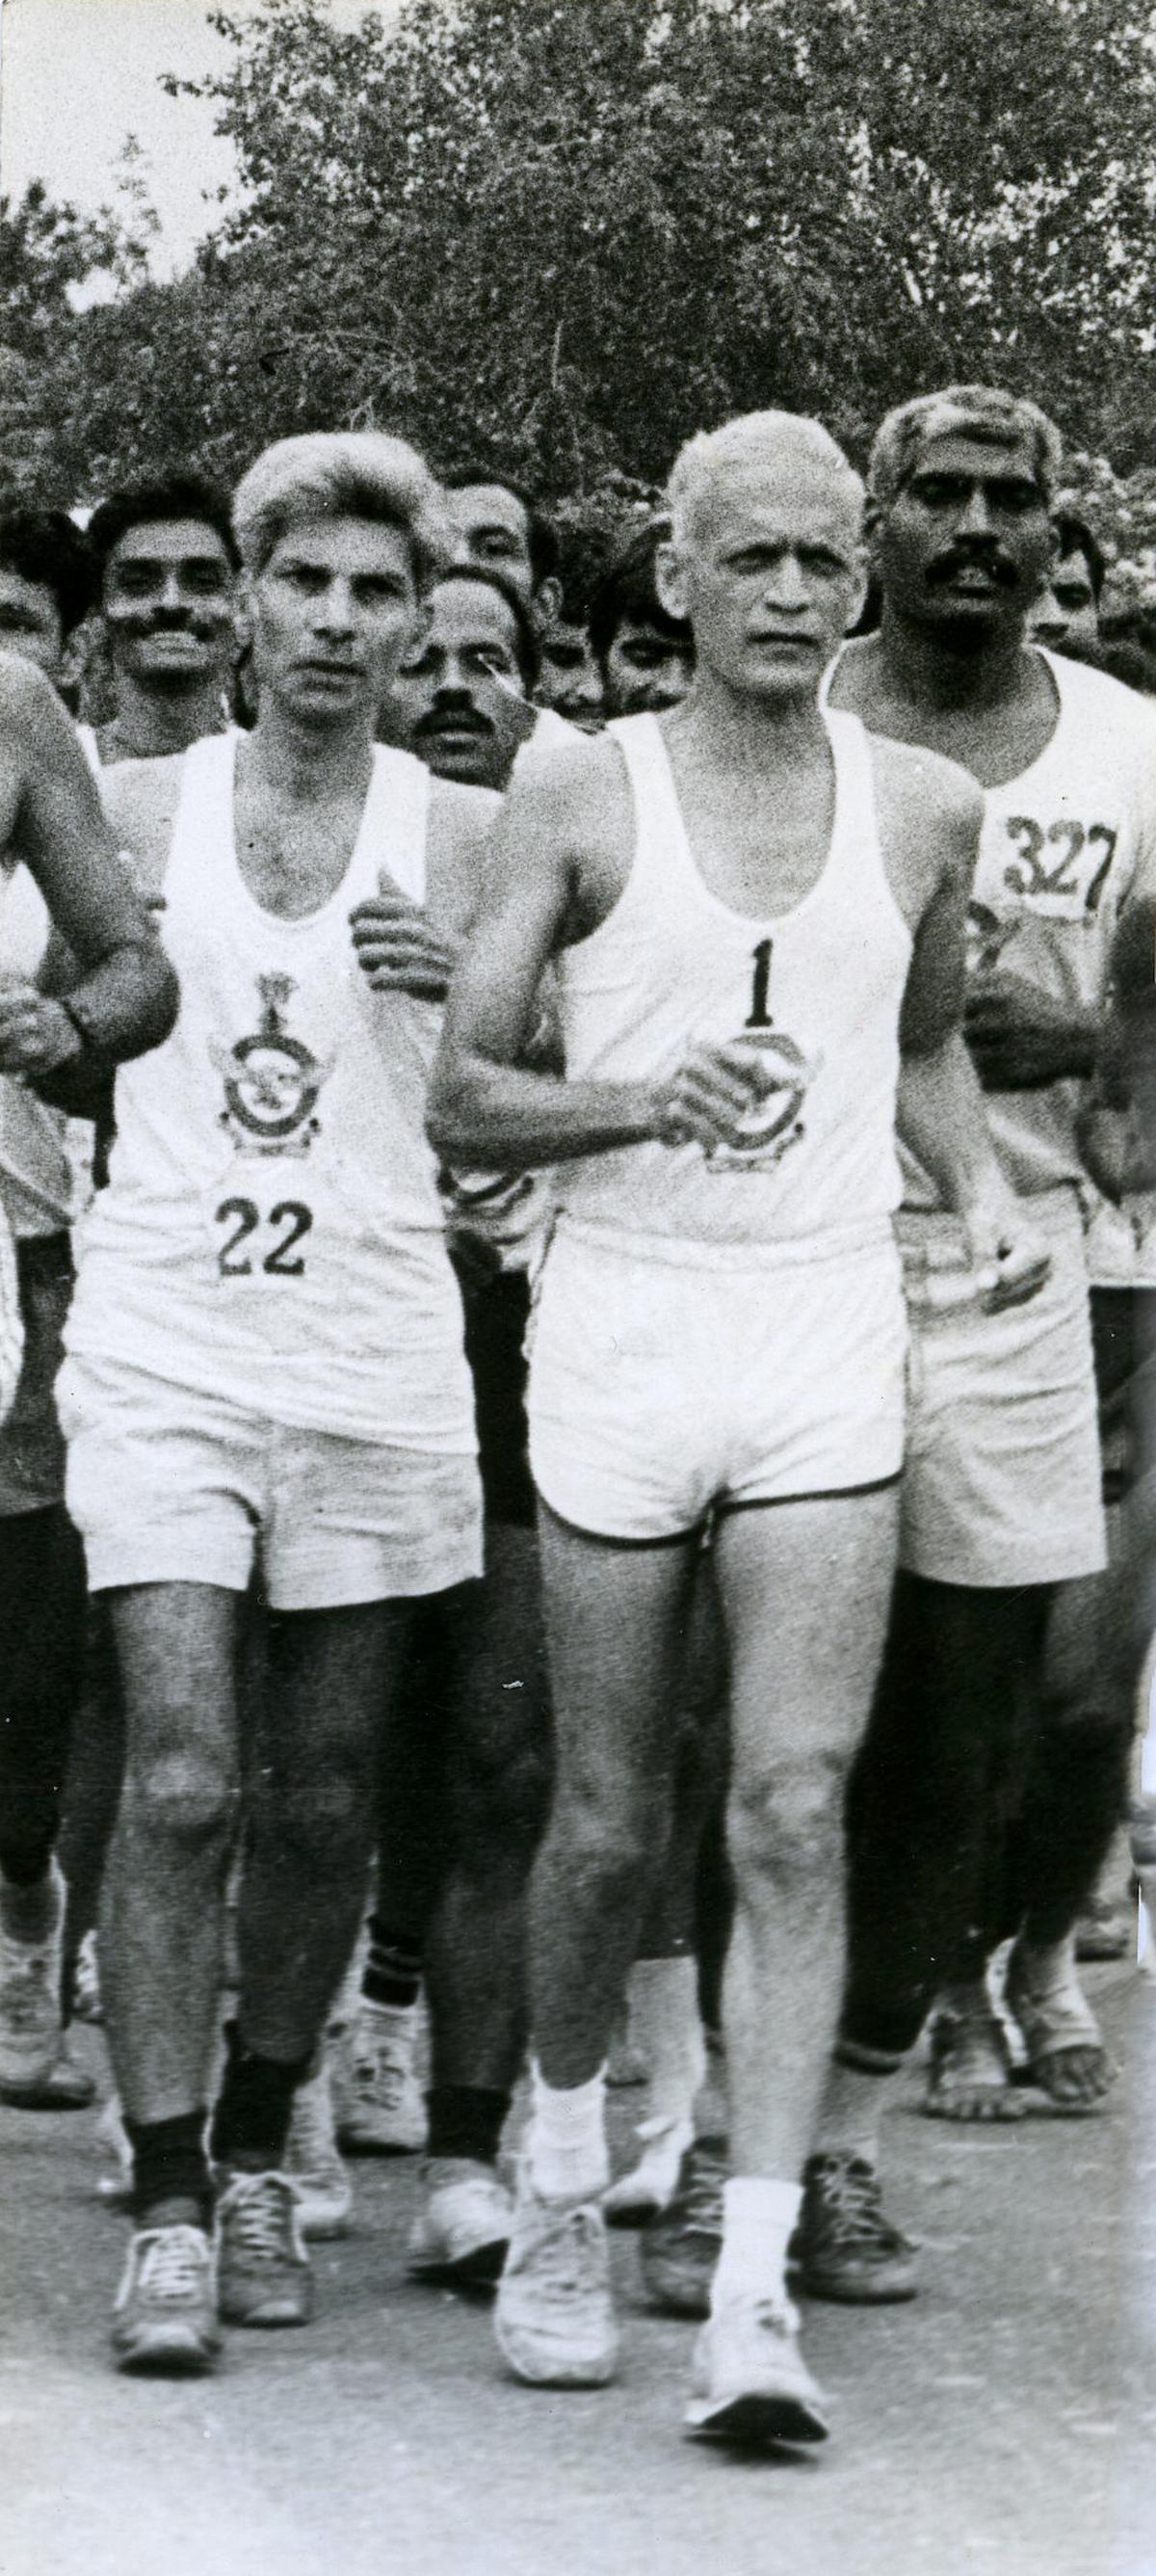 Runathon: The enthusiastic bunch of runners headed by Air Marshal P. V. Iyer (No. 1) reaching the finishing point at Delhi after a four-day jog from Agra. 
PHOTO: THE HINDU ARCHIVES